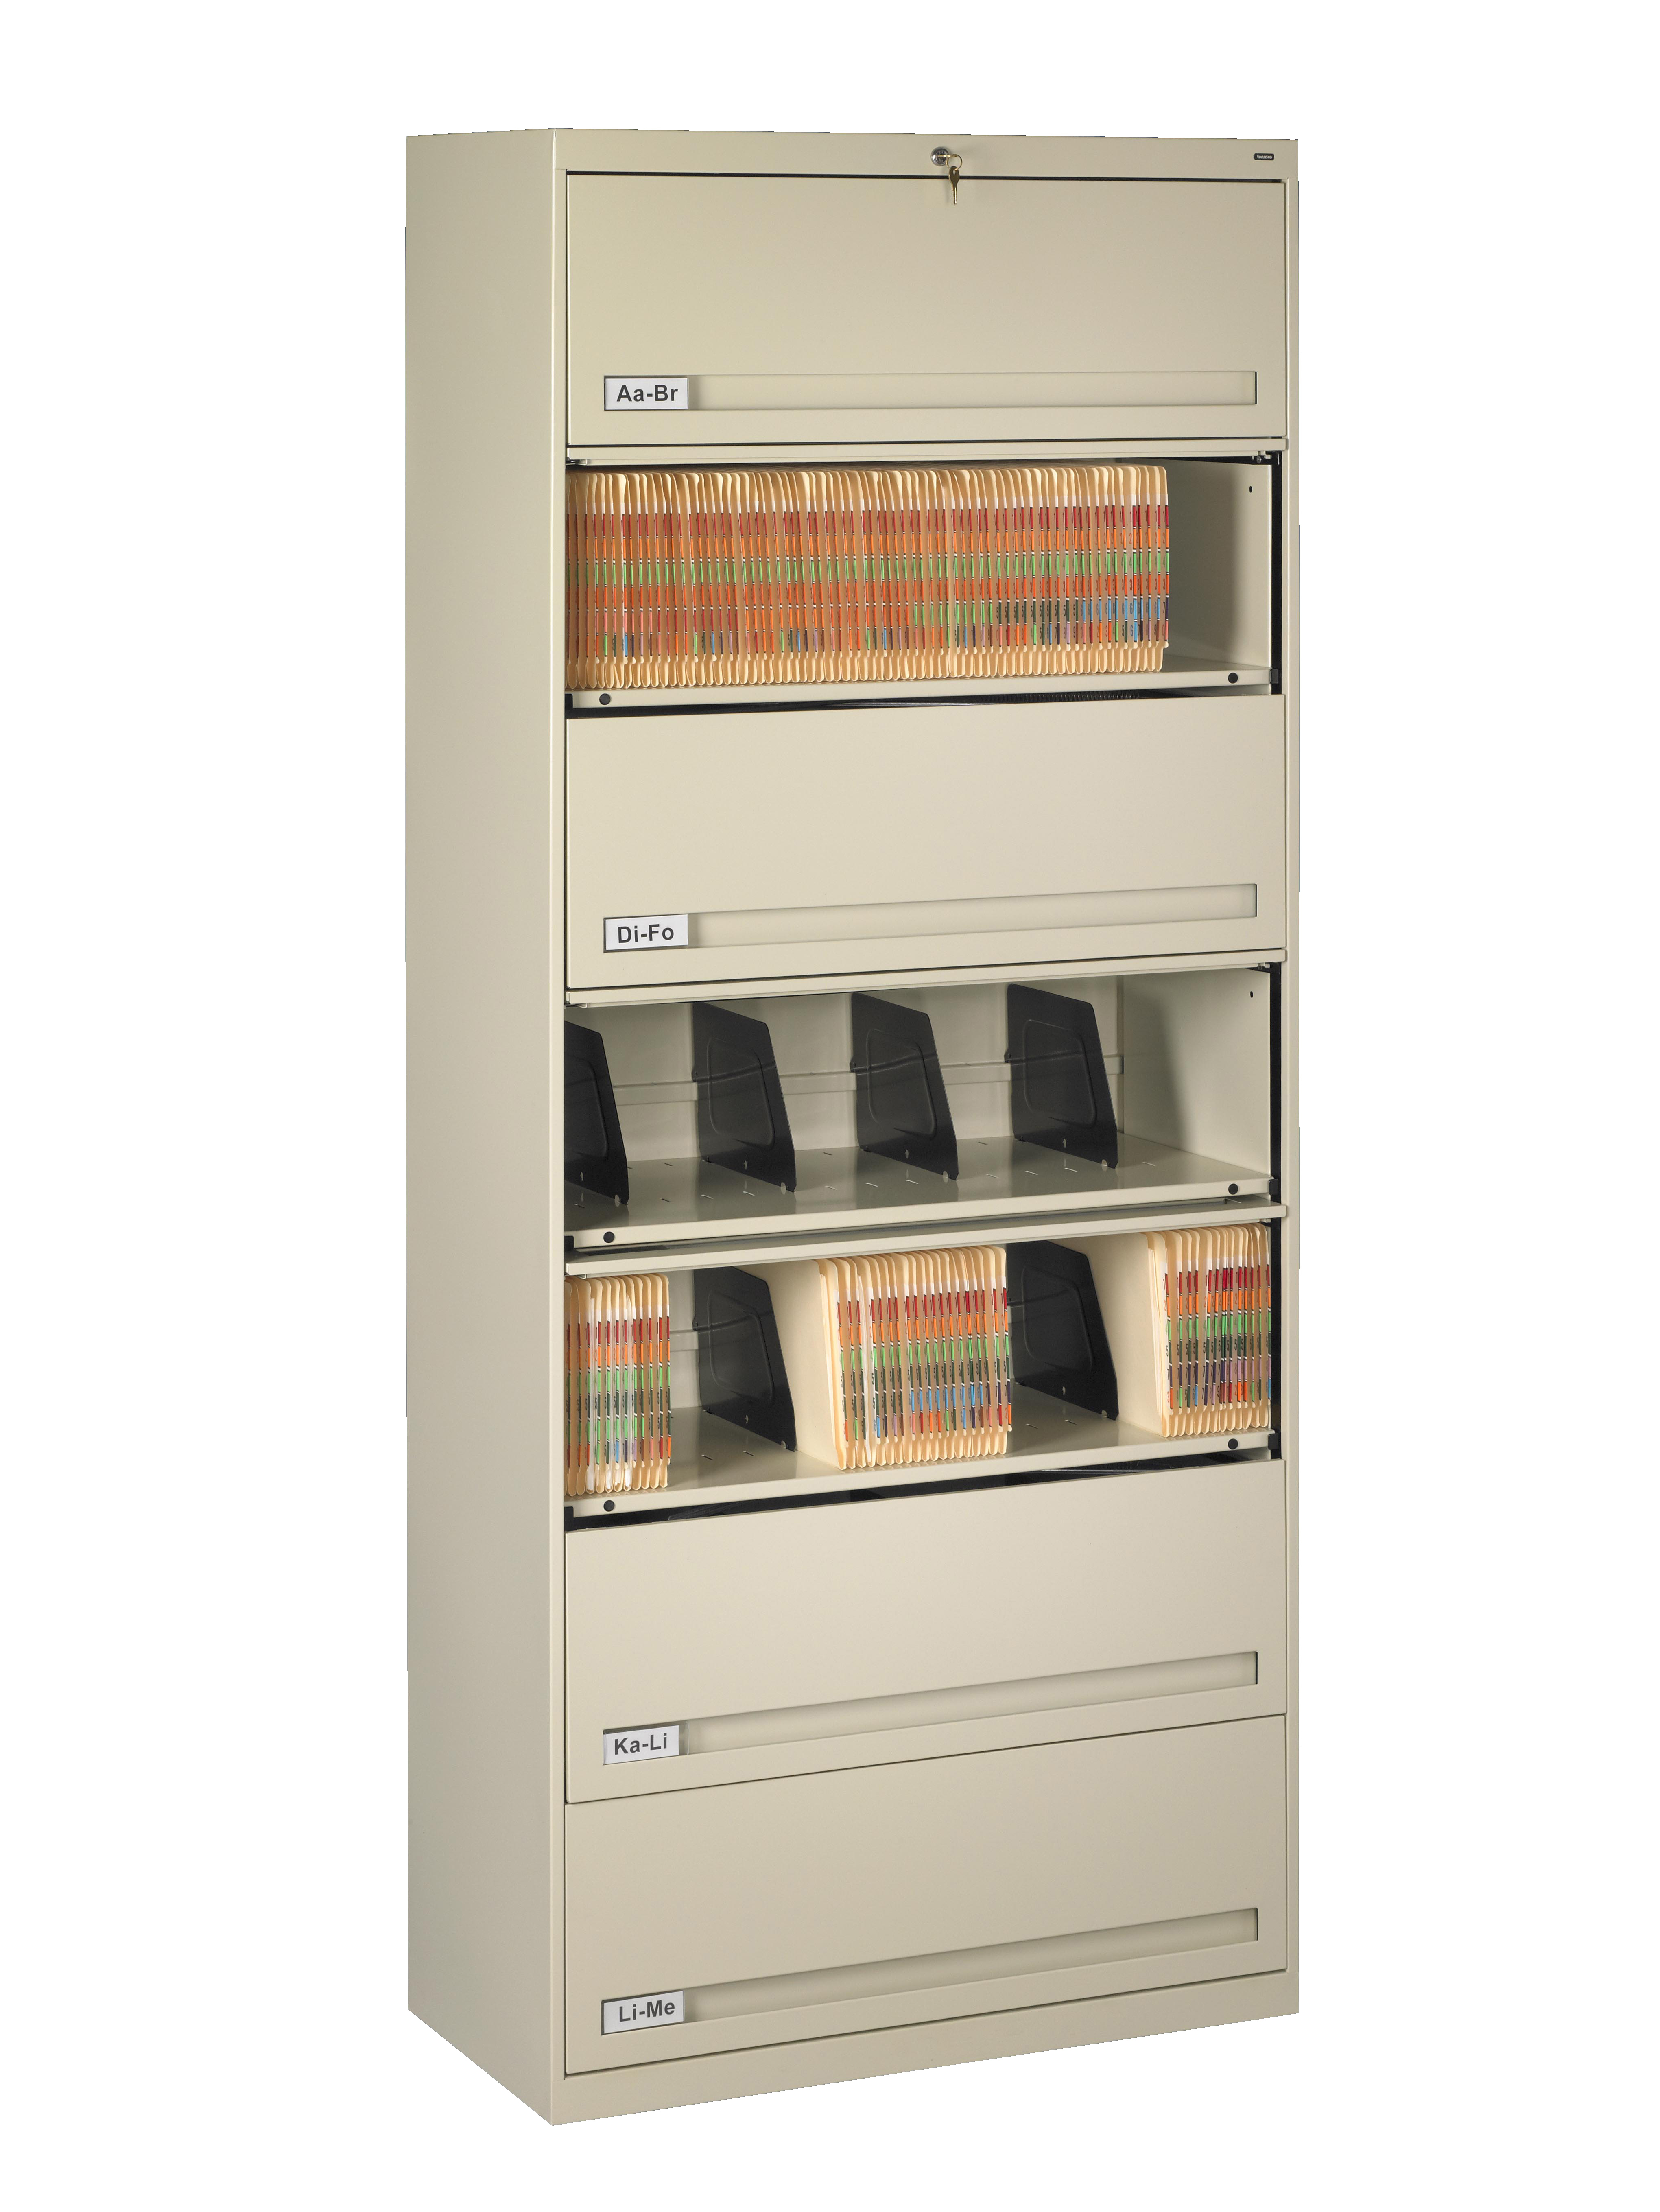 Tennsco Storage Made Easy 7 Tier Lateral File With Fixed Shelf within dimensions 4080 X 5436